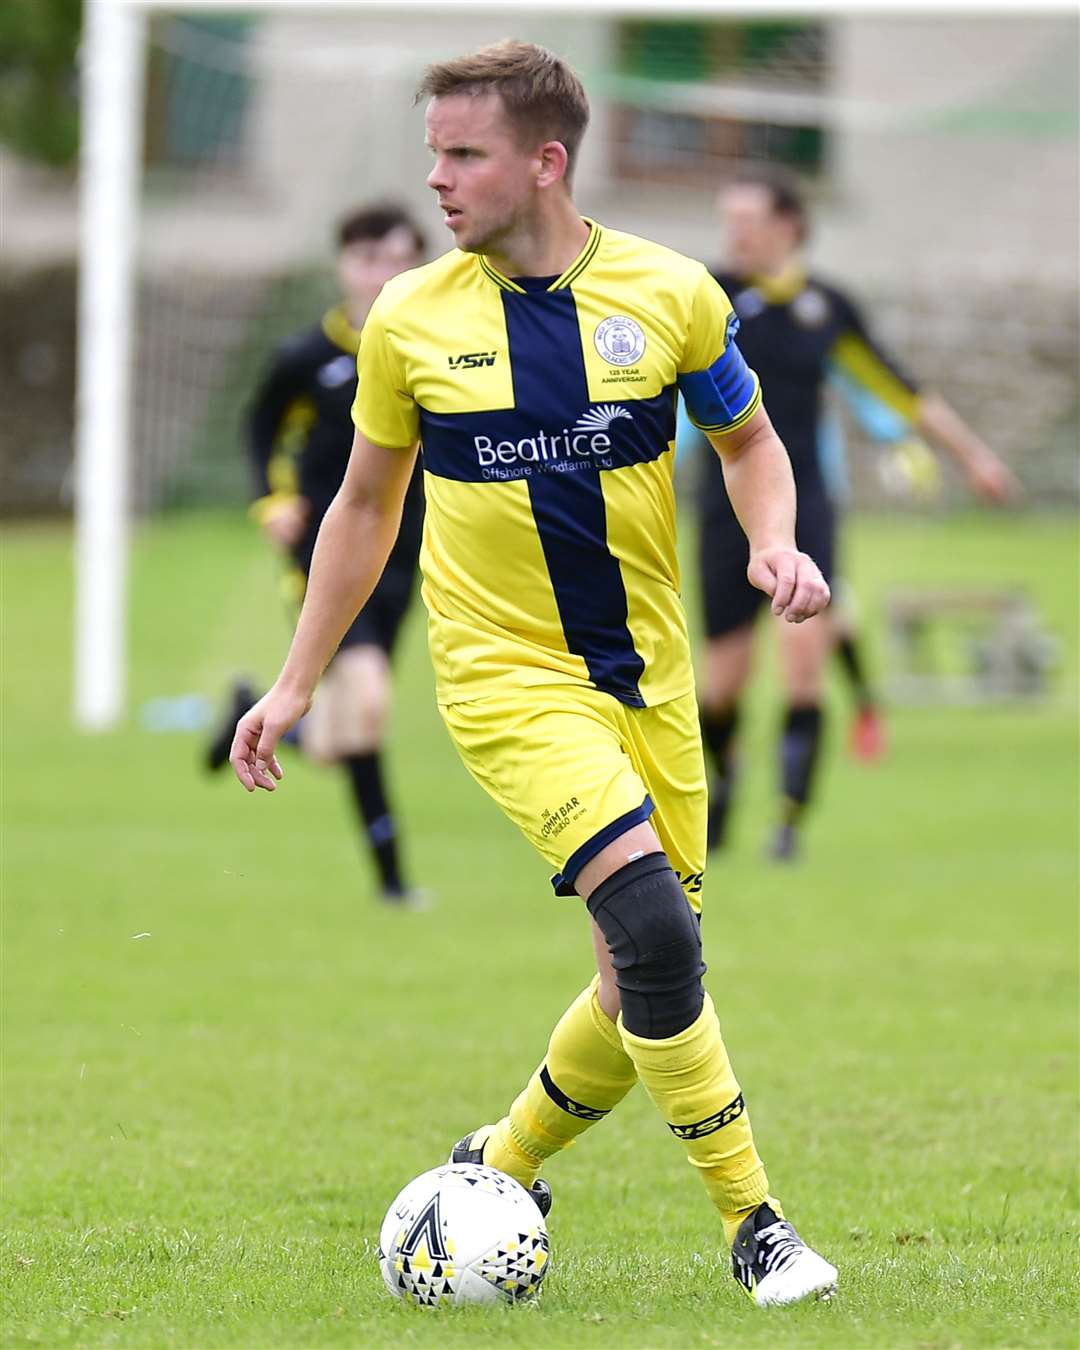 Wick Academy captain Alan Farquhar, who is working his way back to fitness after a serious knee injury, played for 77 minutes of his testimonial game at Back Park. Picture: Mel Roger